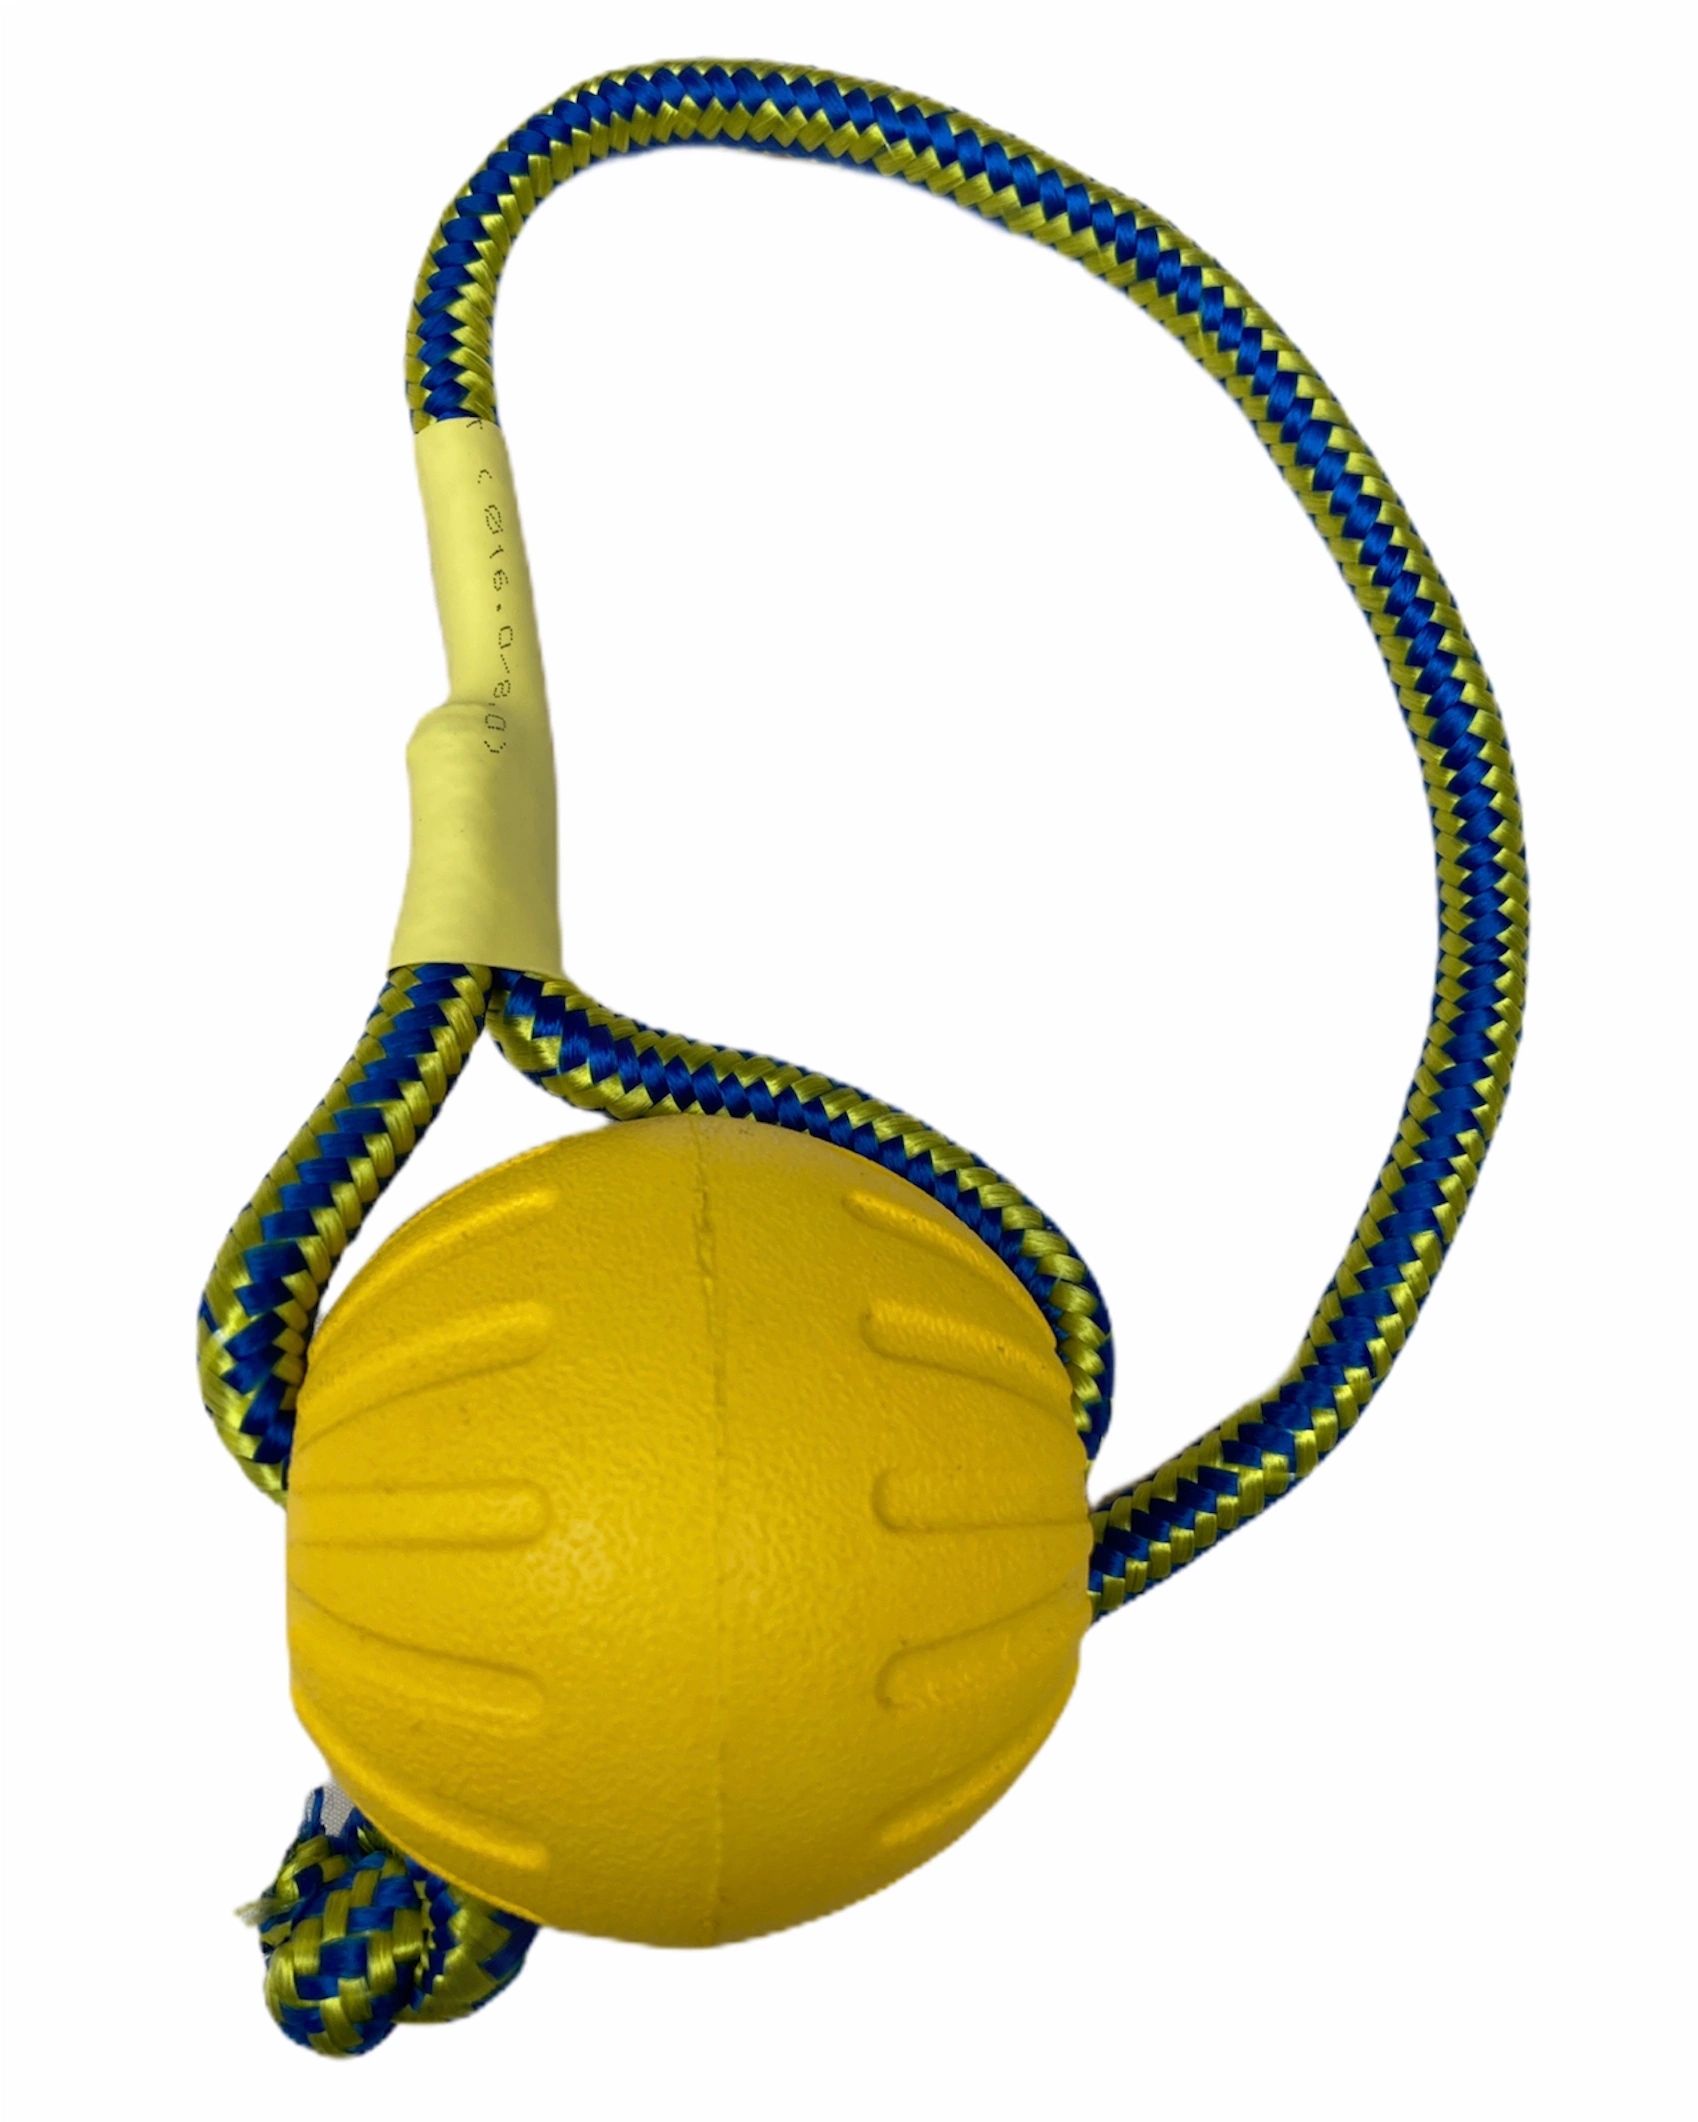 Indestructible Ball On A Rope